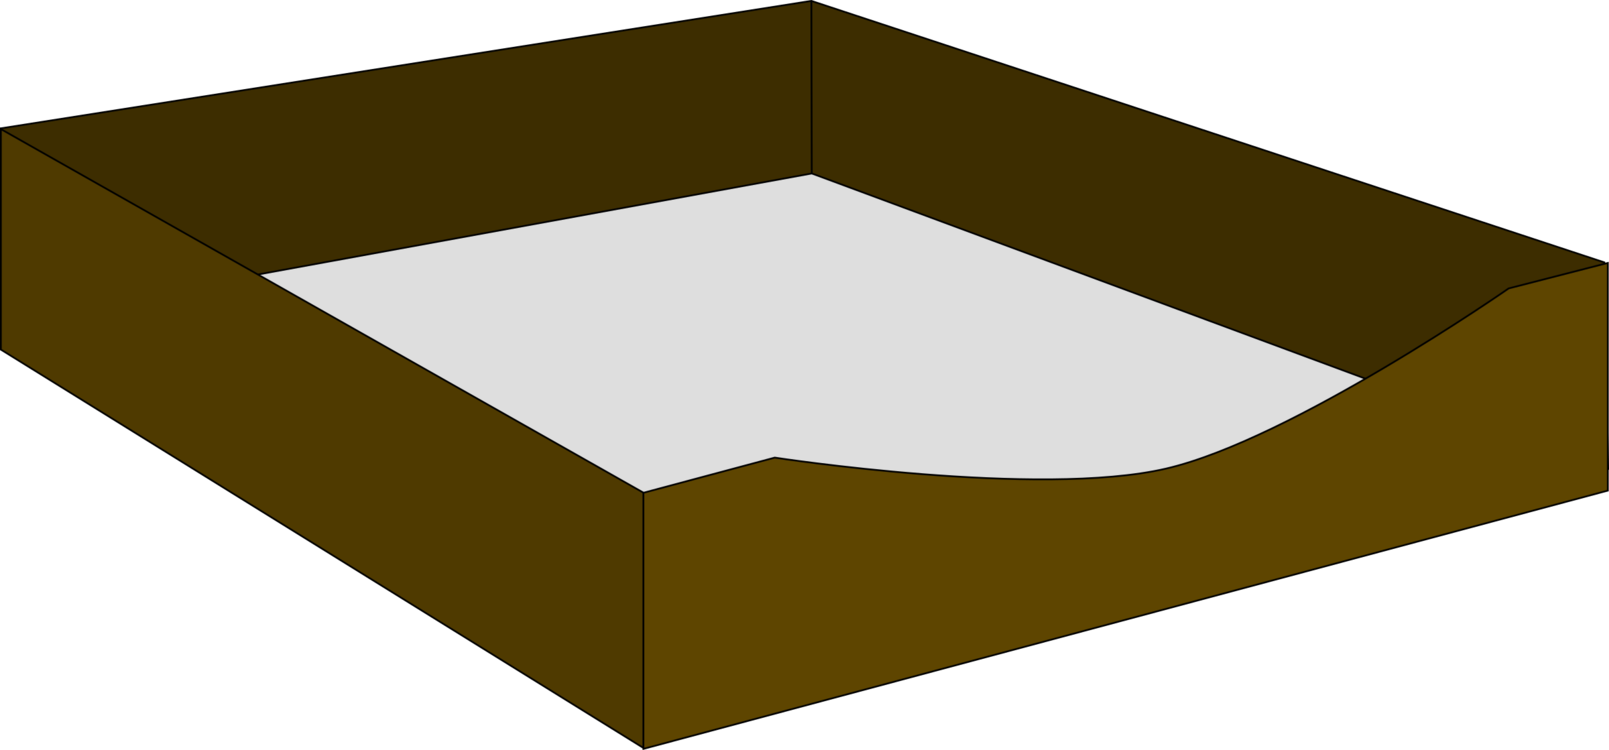 Square,Angle,Material